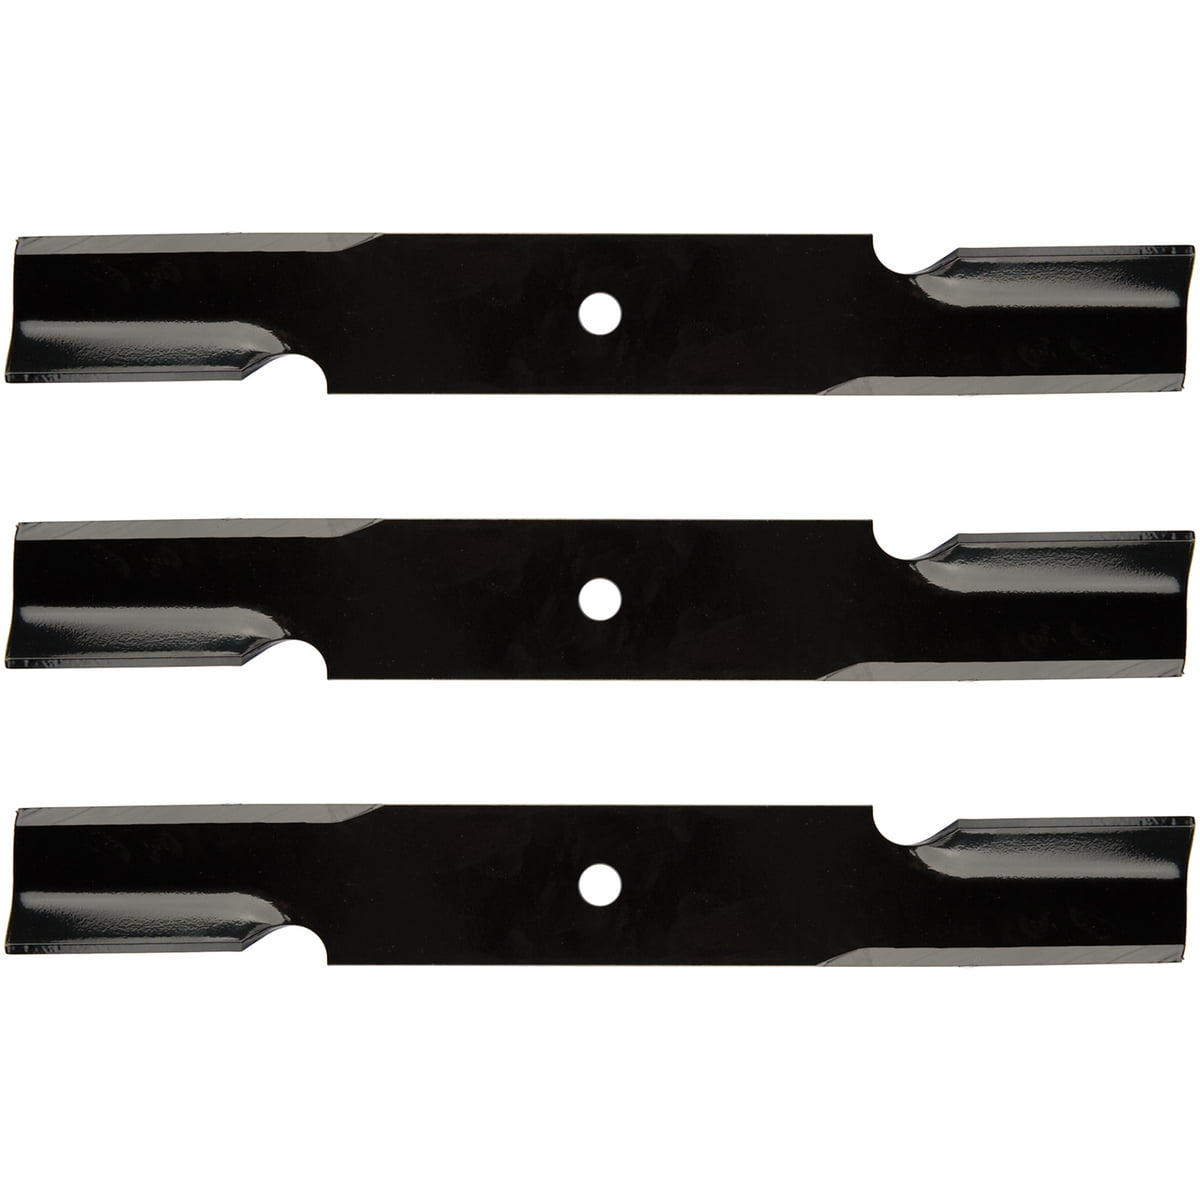 Details about   Oregon Lawnmower Blades 18" High-Lift 6 ea 91-637 New 